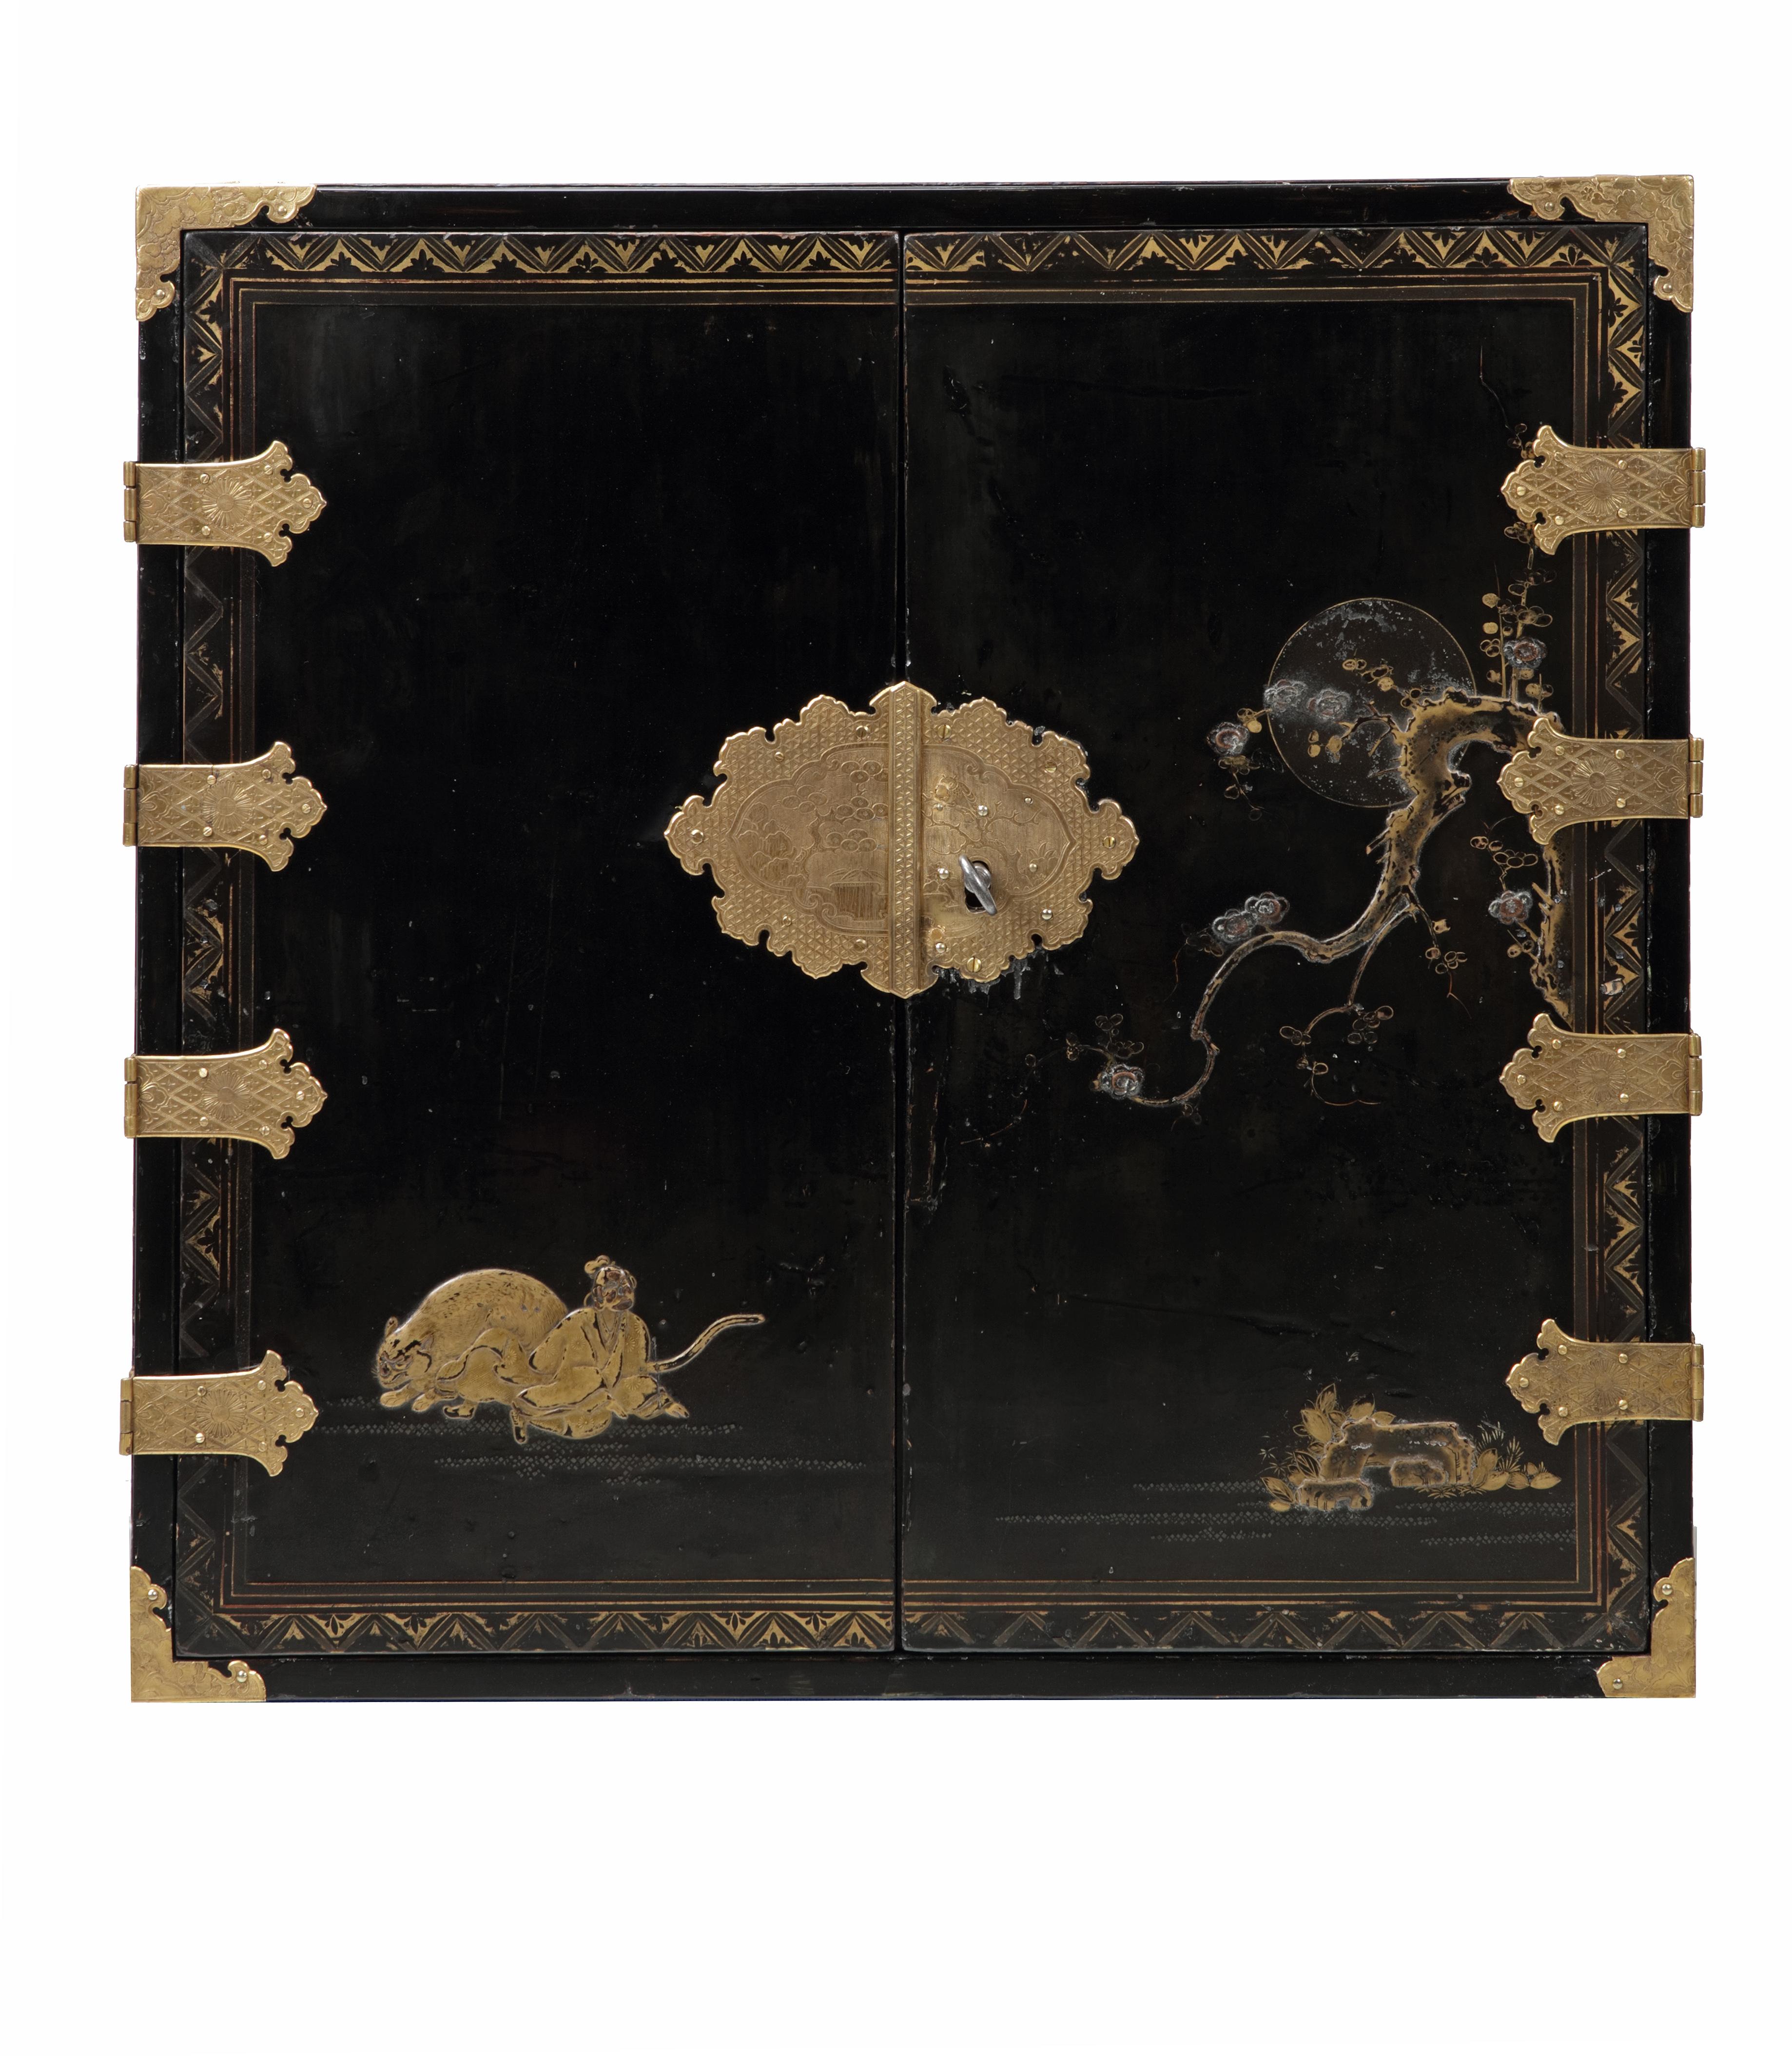 A fine Japanese pictoral style lacquer cabinet with gilt-metal mounts



Kyoto, Edo period, 1670-1690

Decorated in Japanese relief lacquer work, black lacquer ground decorated in hiramaki-e, takamaki-e, kirigane and nashiji in gold, silver